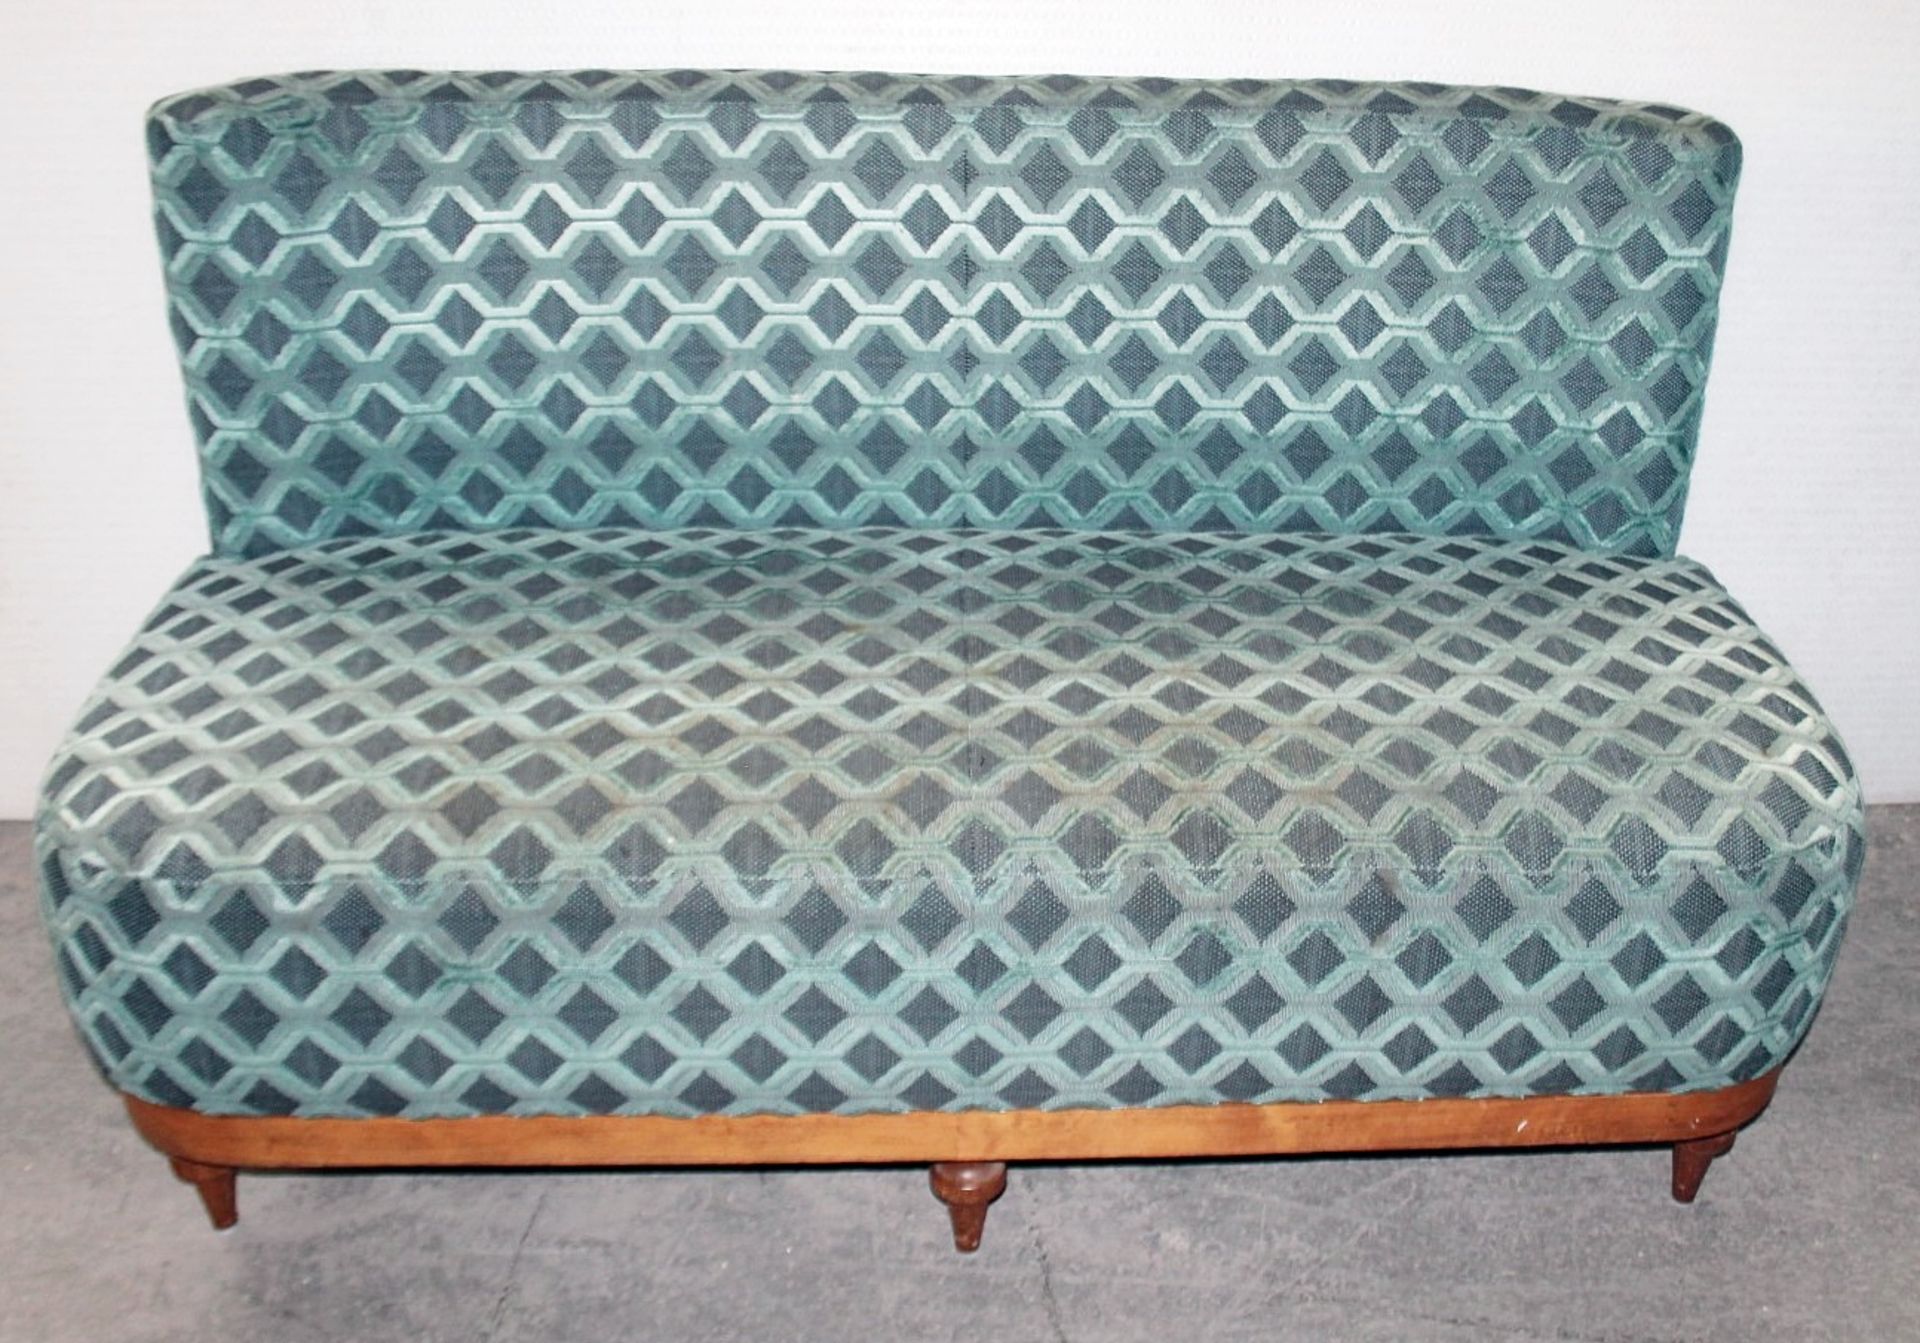 1 x Commercial Freestanding 2-Seater Booth Seating Sofa, Upholstered In Premium Teal Fabrics - Image 2 of 8